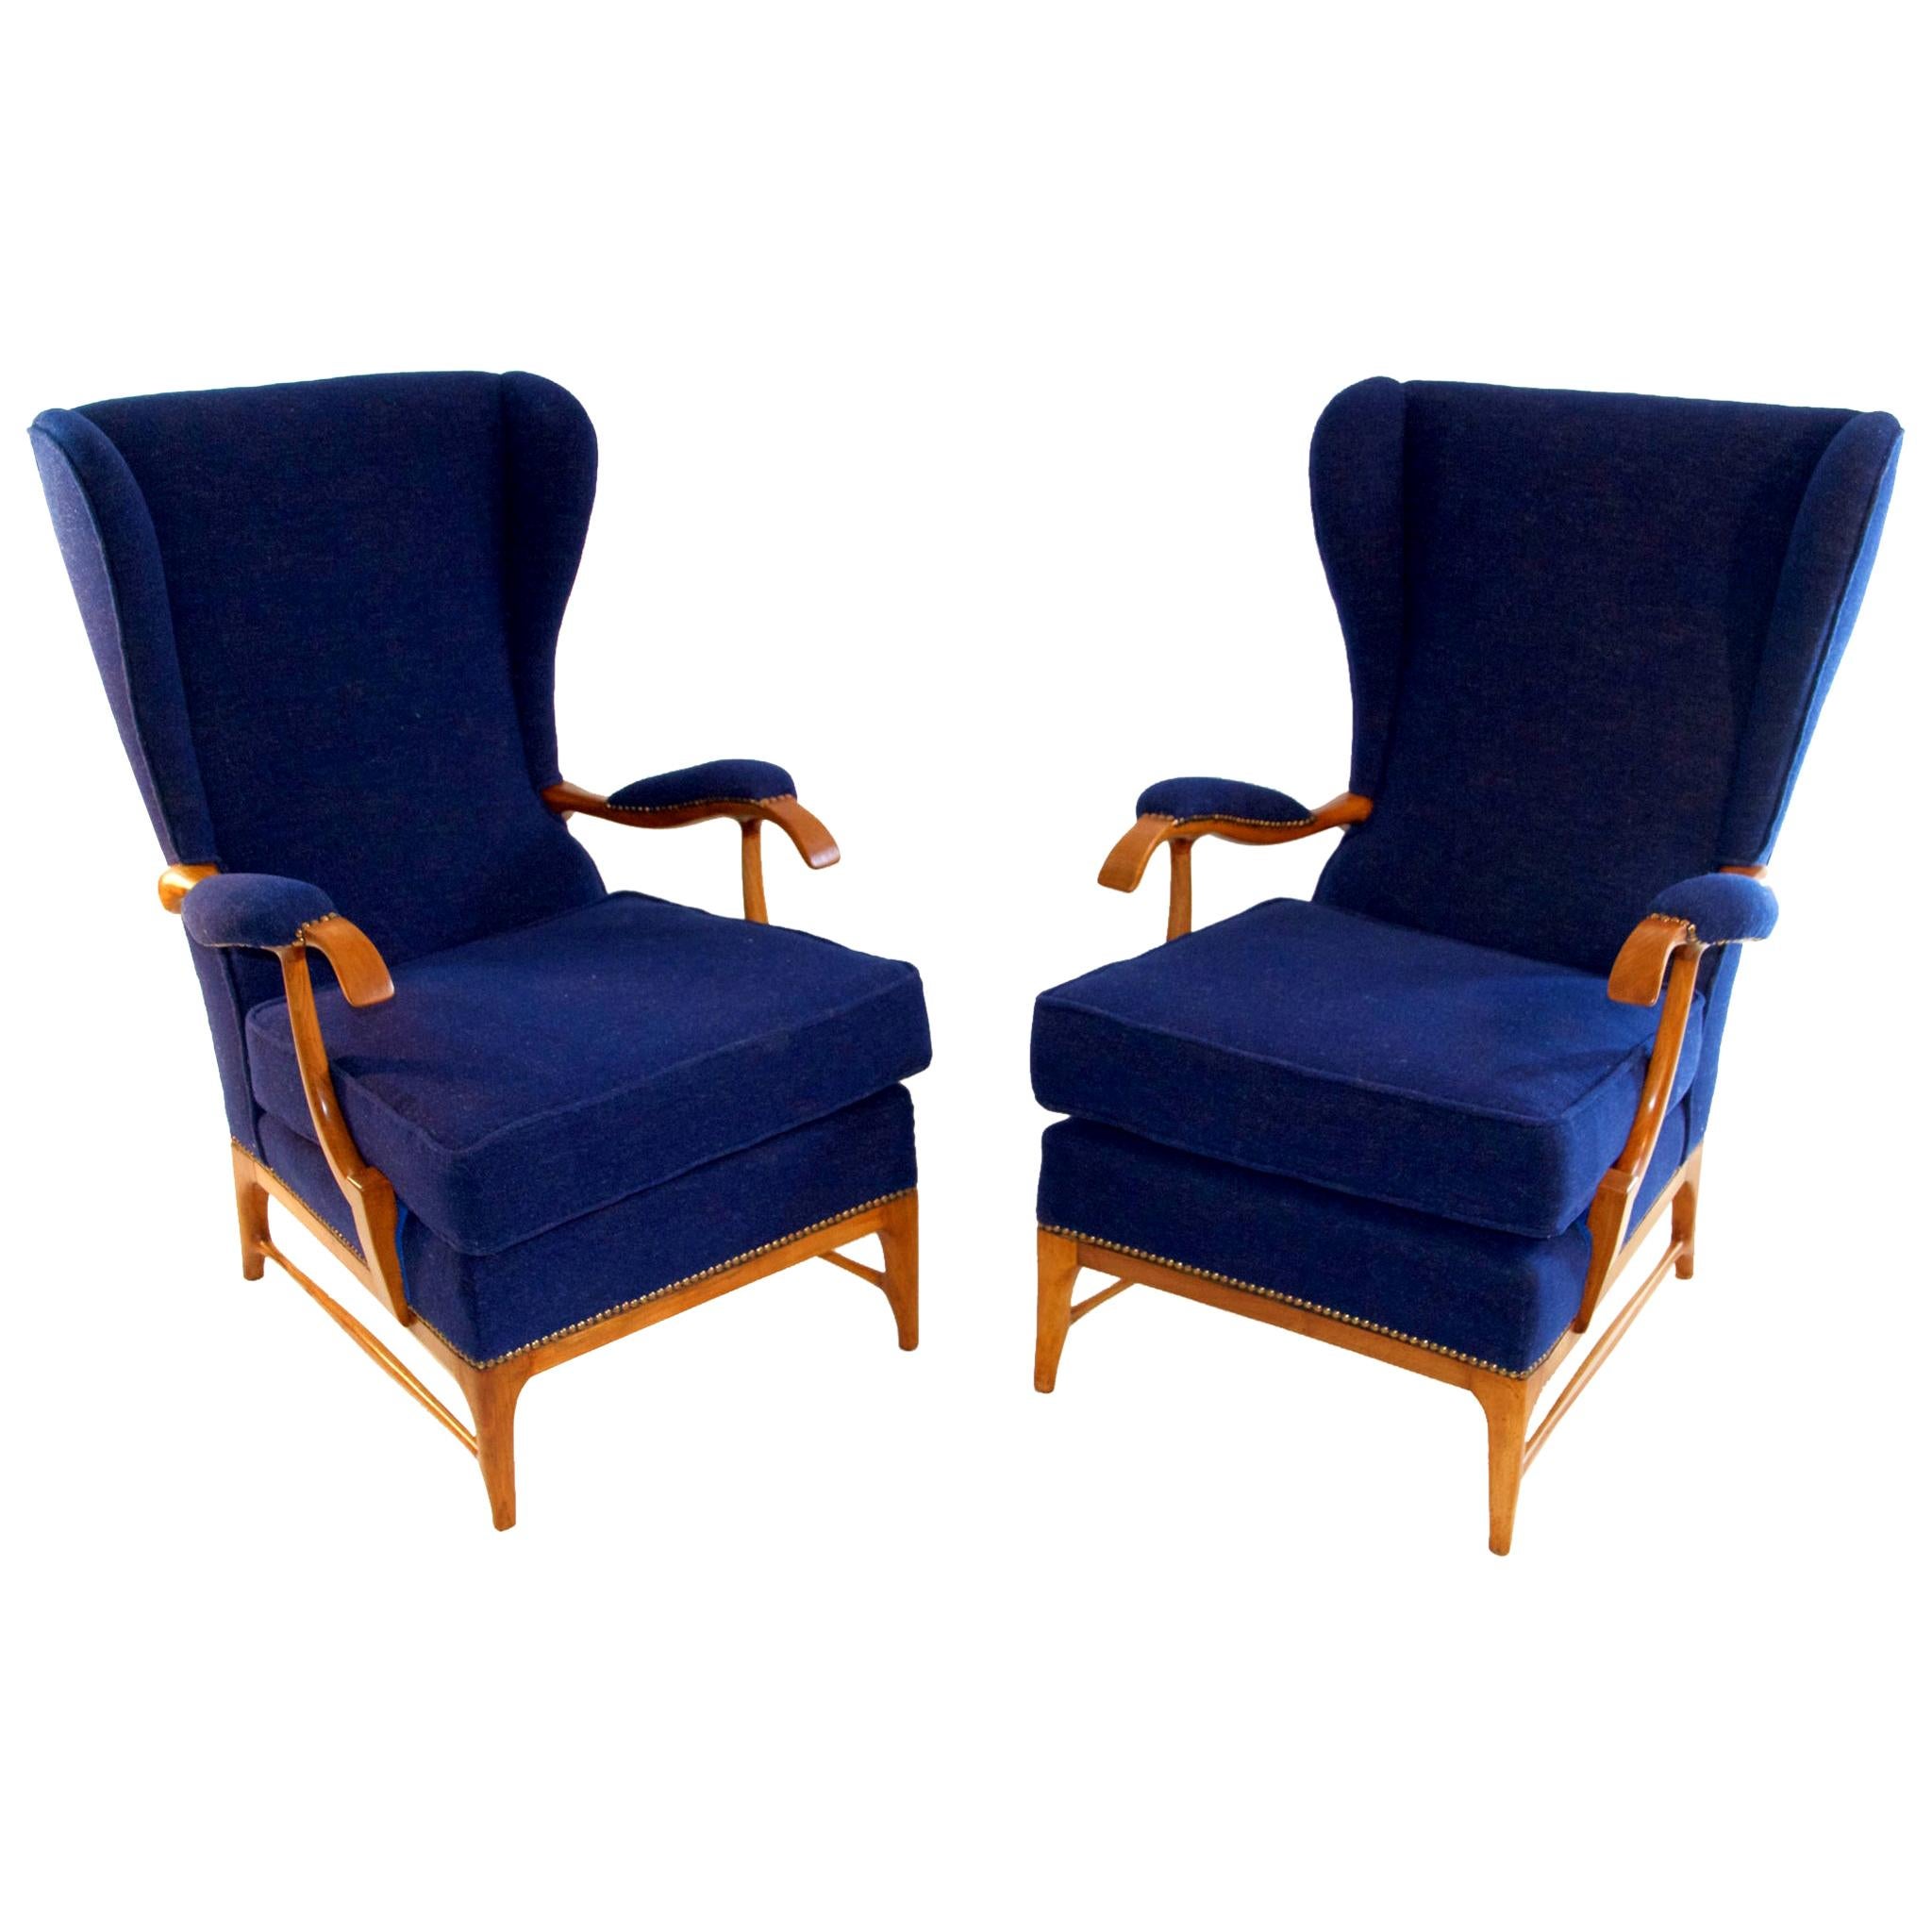 Pair of wingback armchairs by Paolo Buffa with a wood frame in walnut and reupholstered in Italian blue wool.
Paolo Buffa is an Italian designer and architect. He is one of the most prolific designers from the 20th century.
His work is the